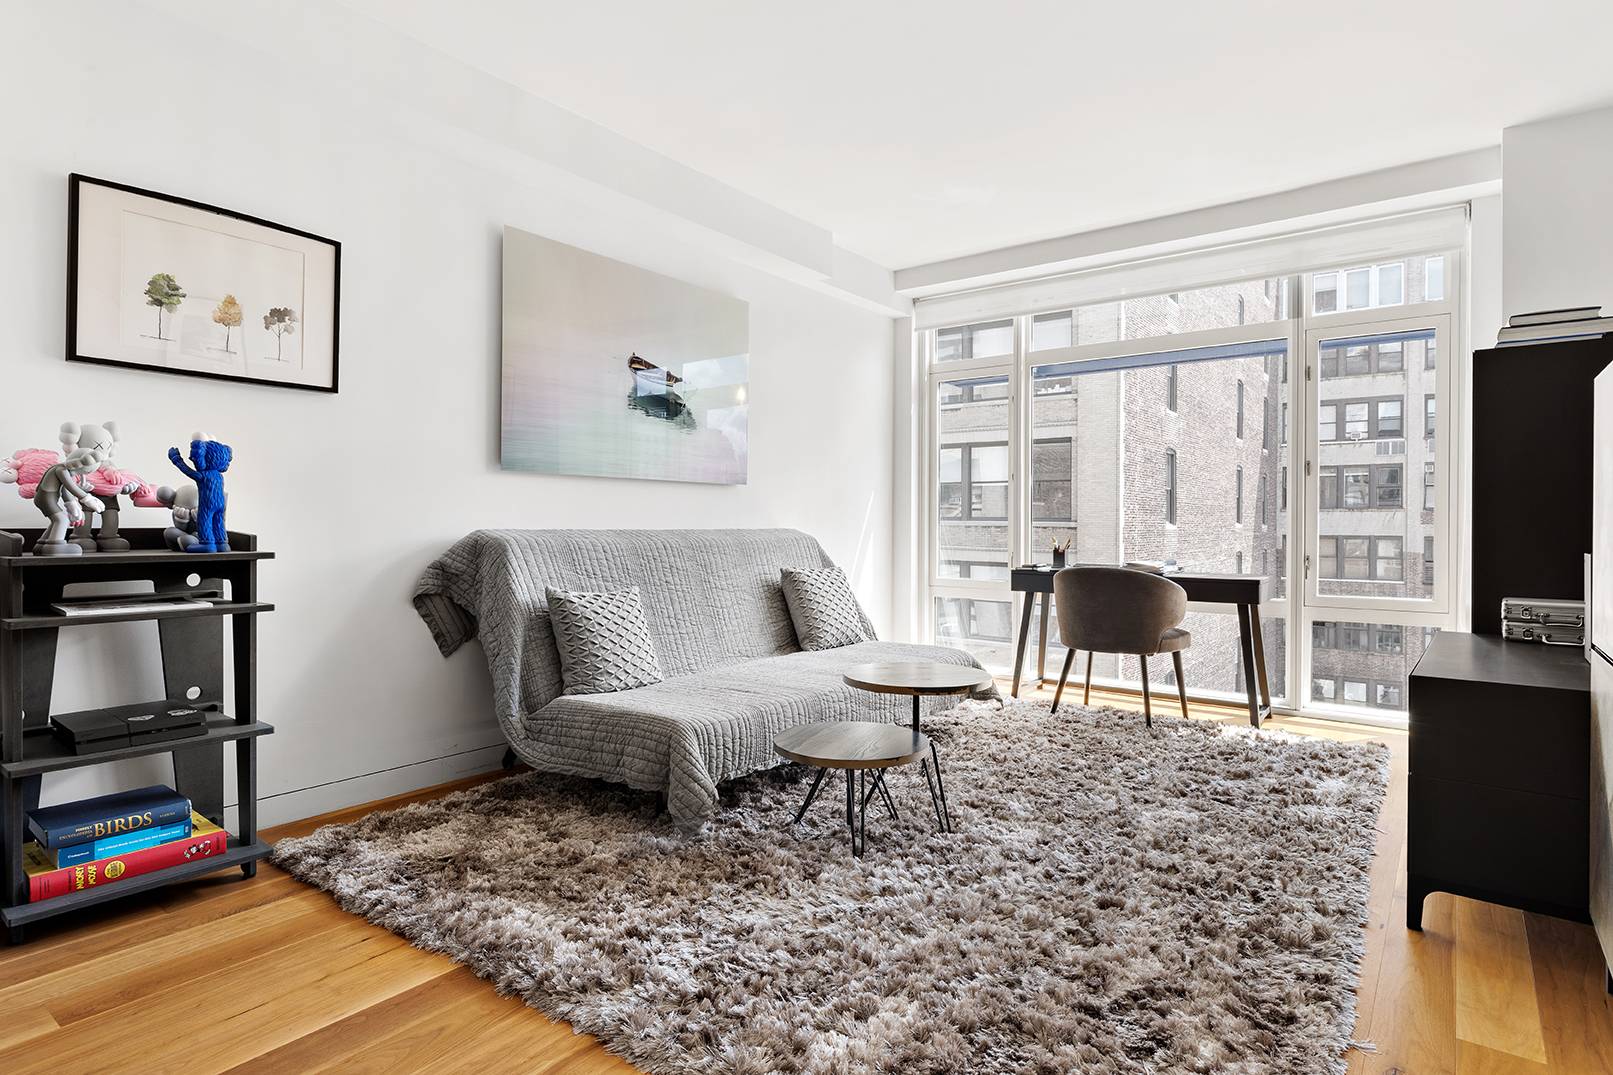 Apartment 8C at Chelsea Green is a luxurious high floor, south facing higher floor one bedroom featuring floor to ceiling windows and 7 inch wide plank walnut floors.